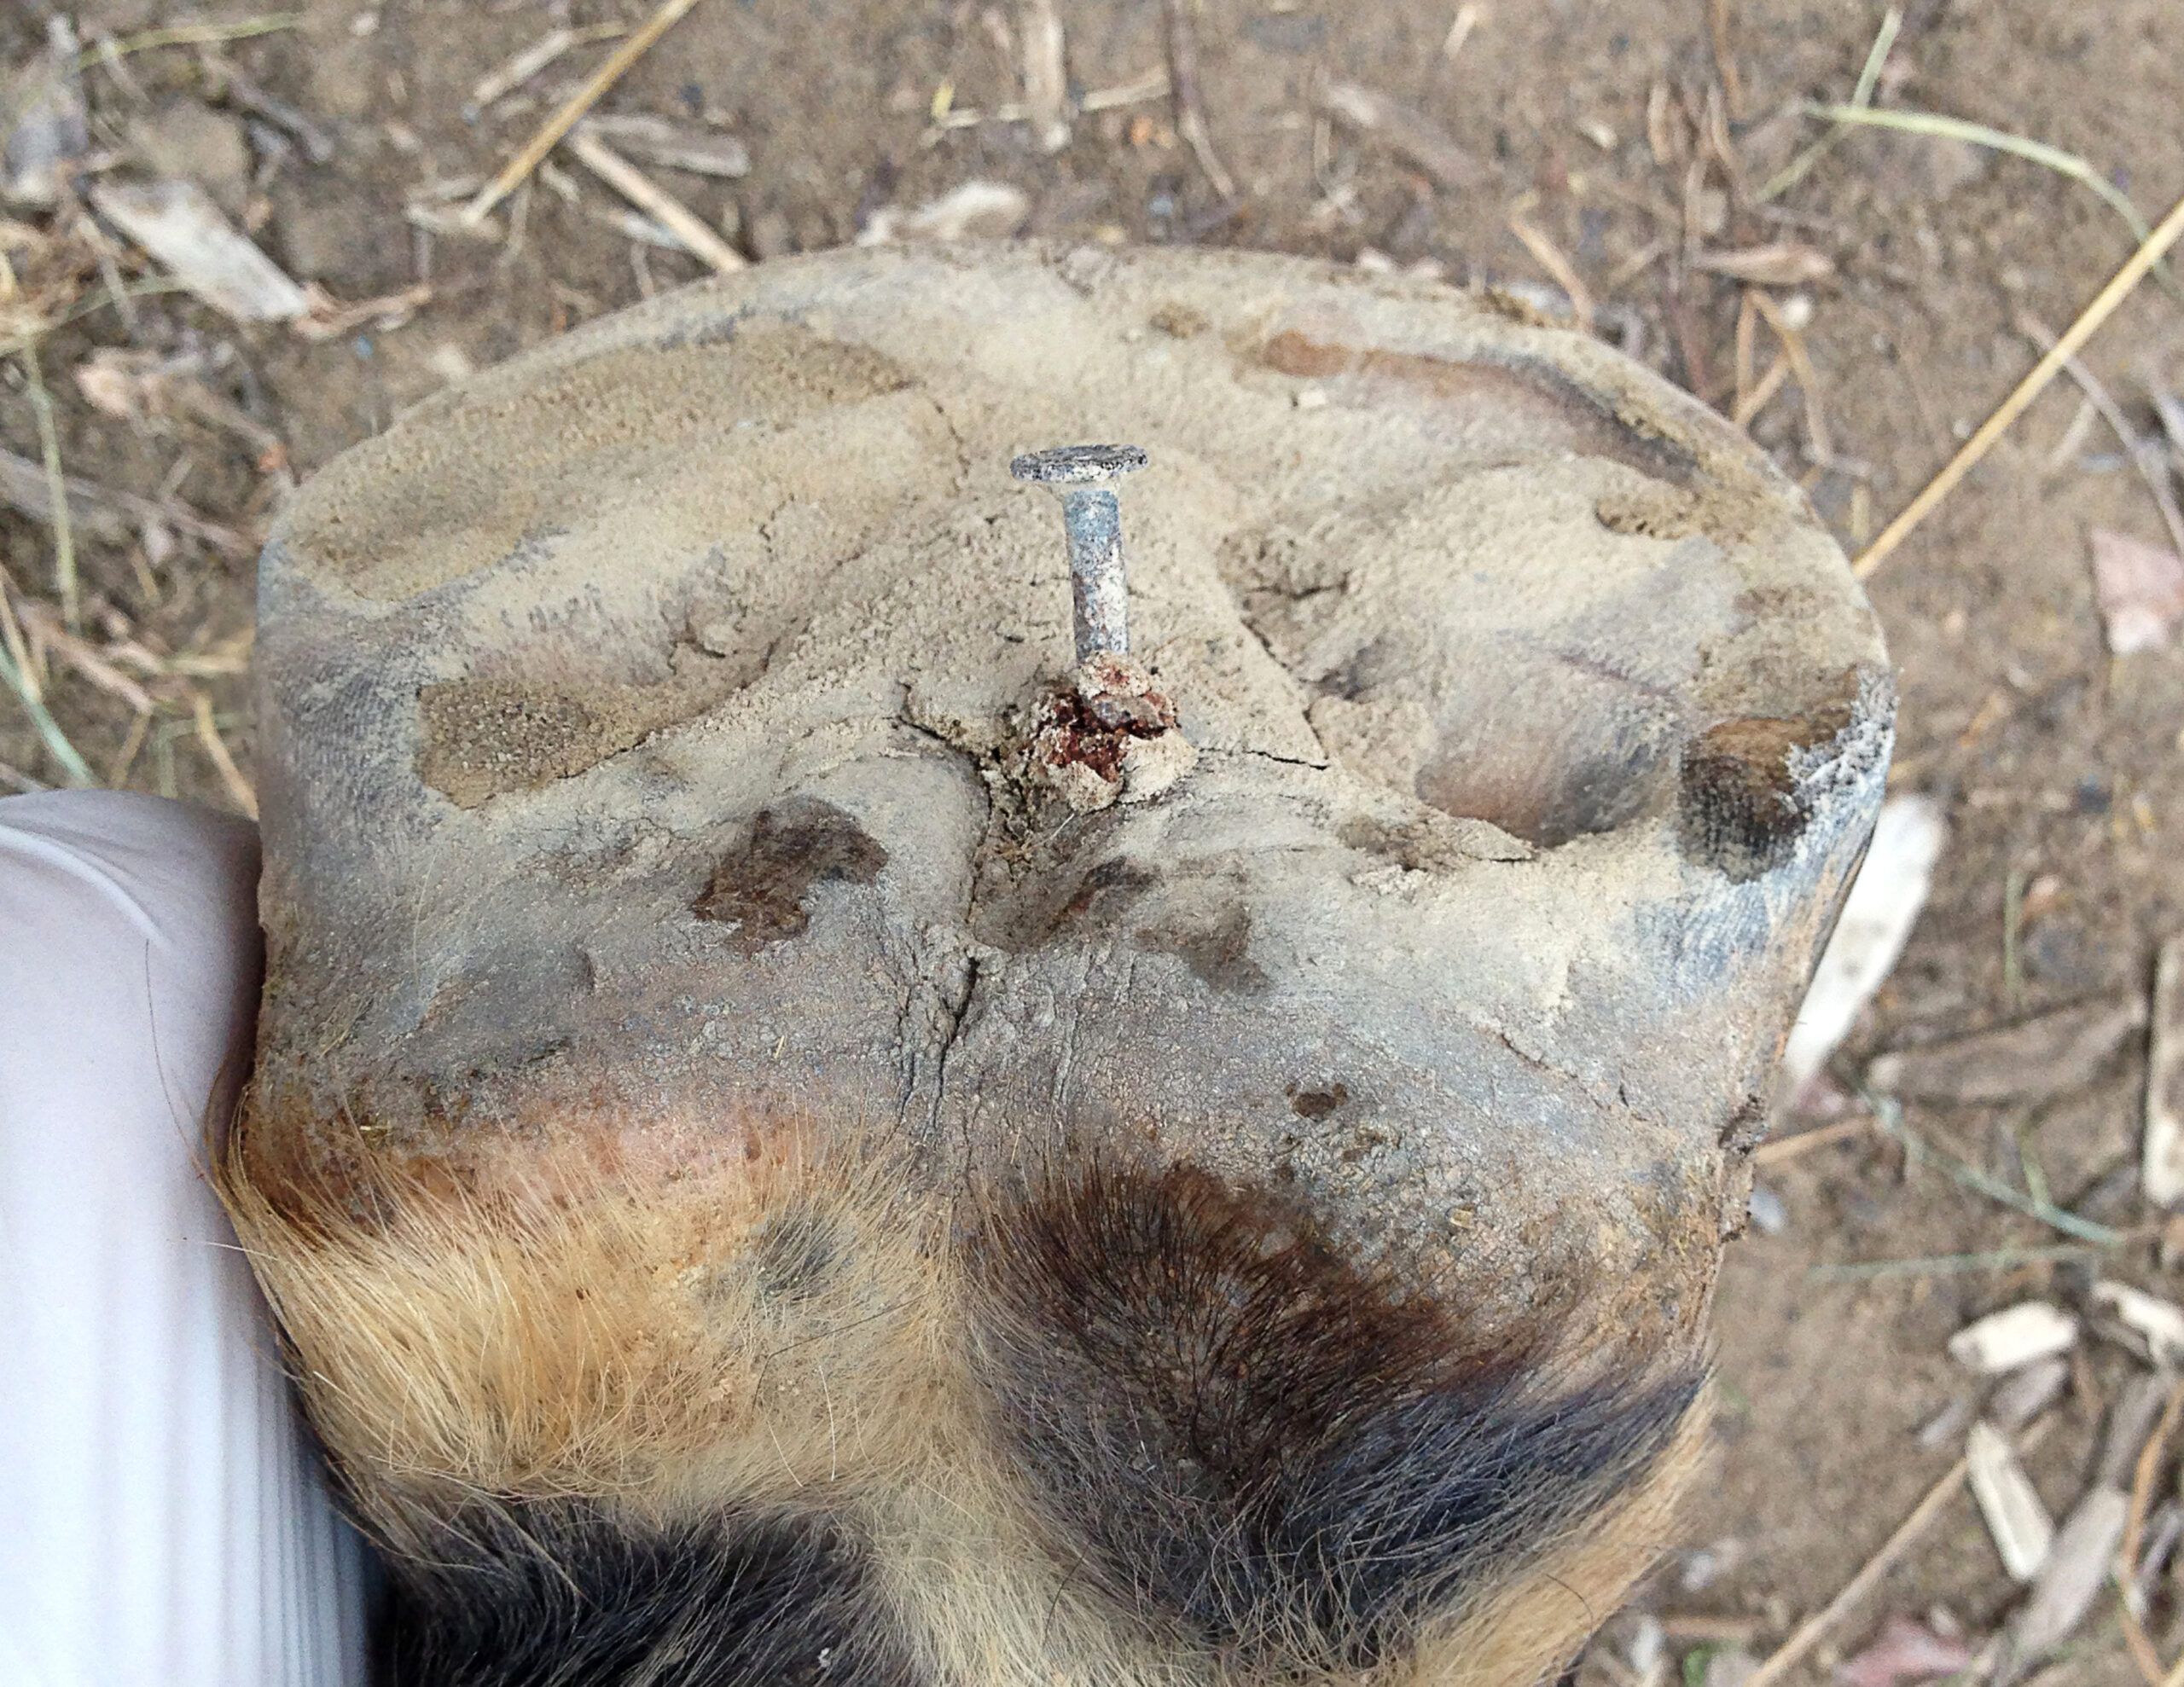 Puncture Wounds of the Hoof: What to do, What not to do